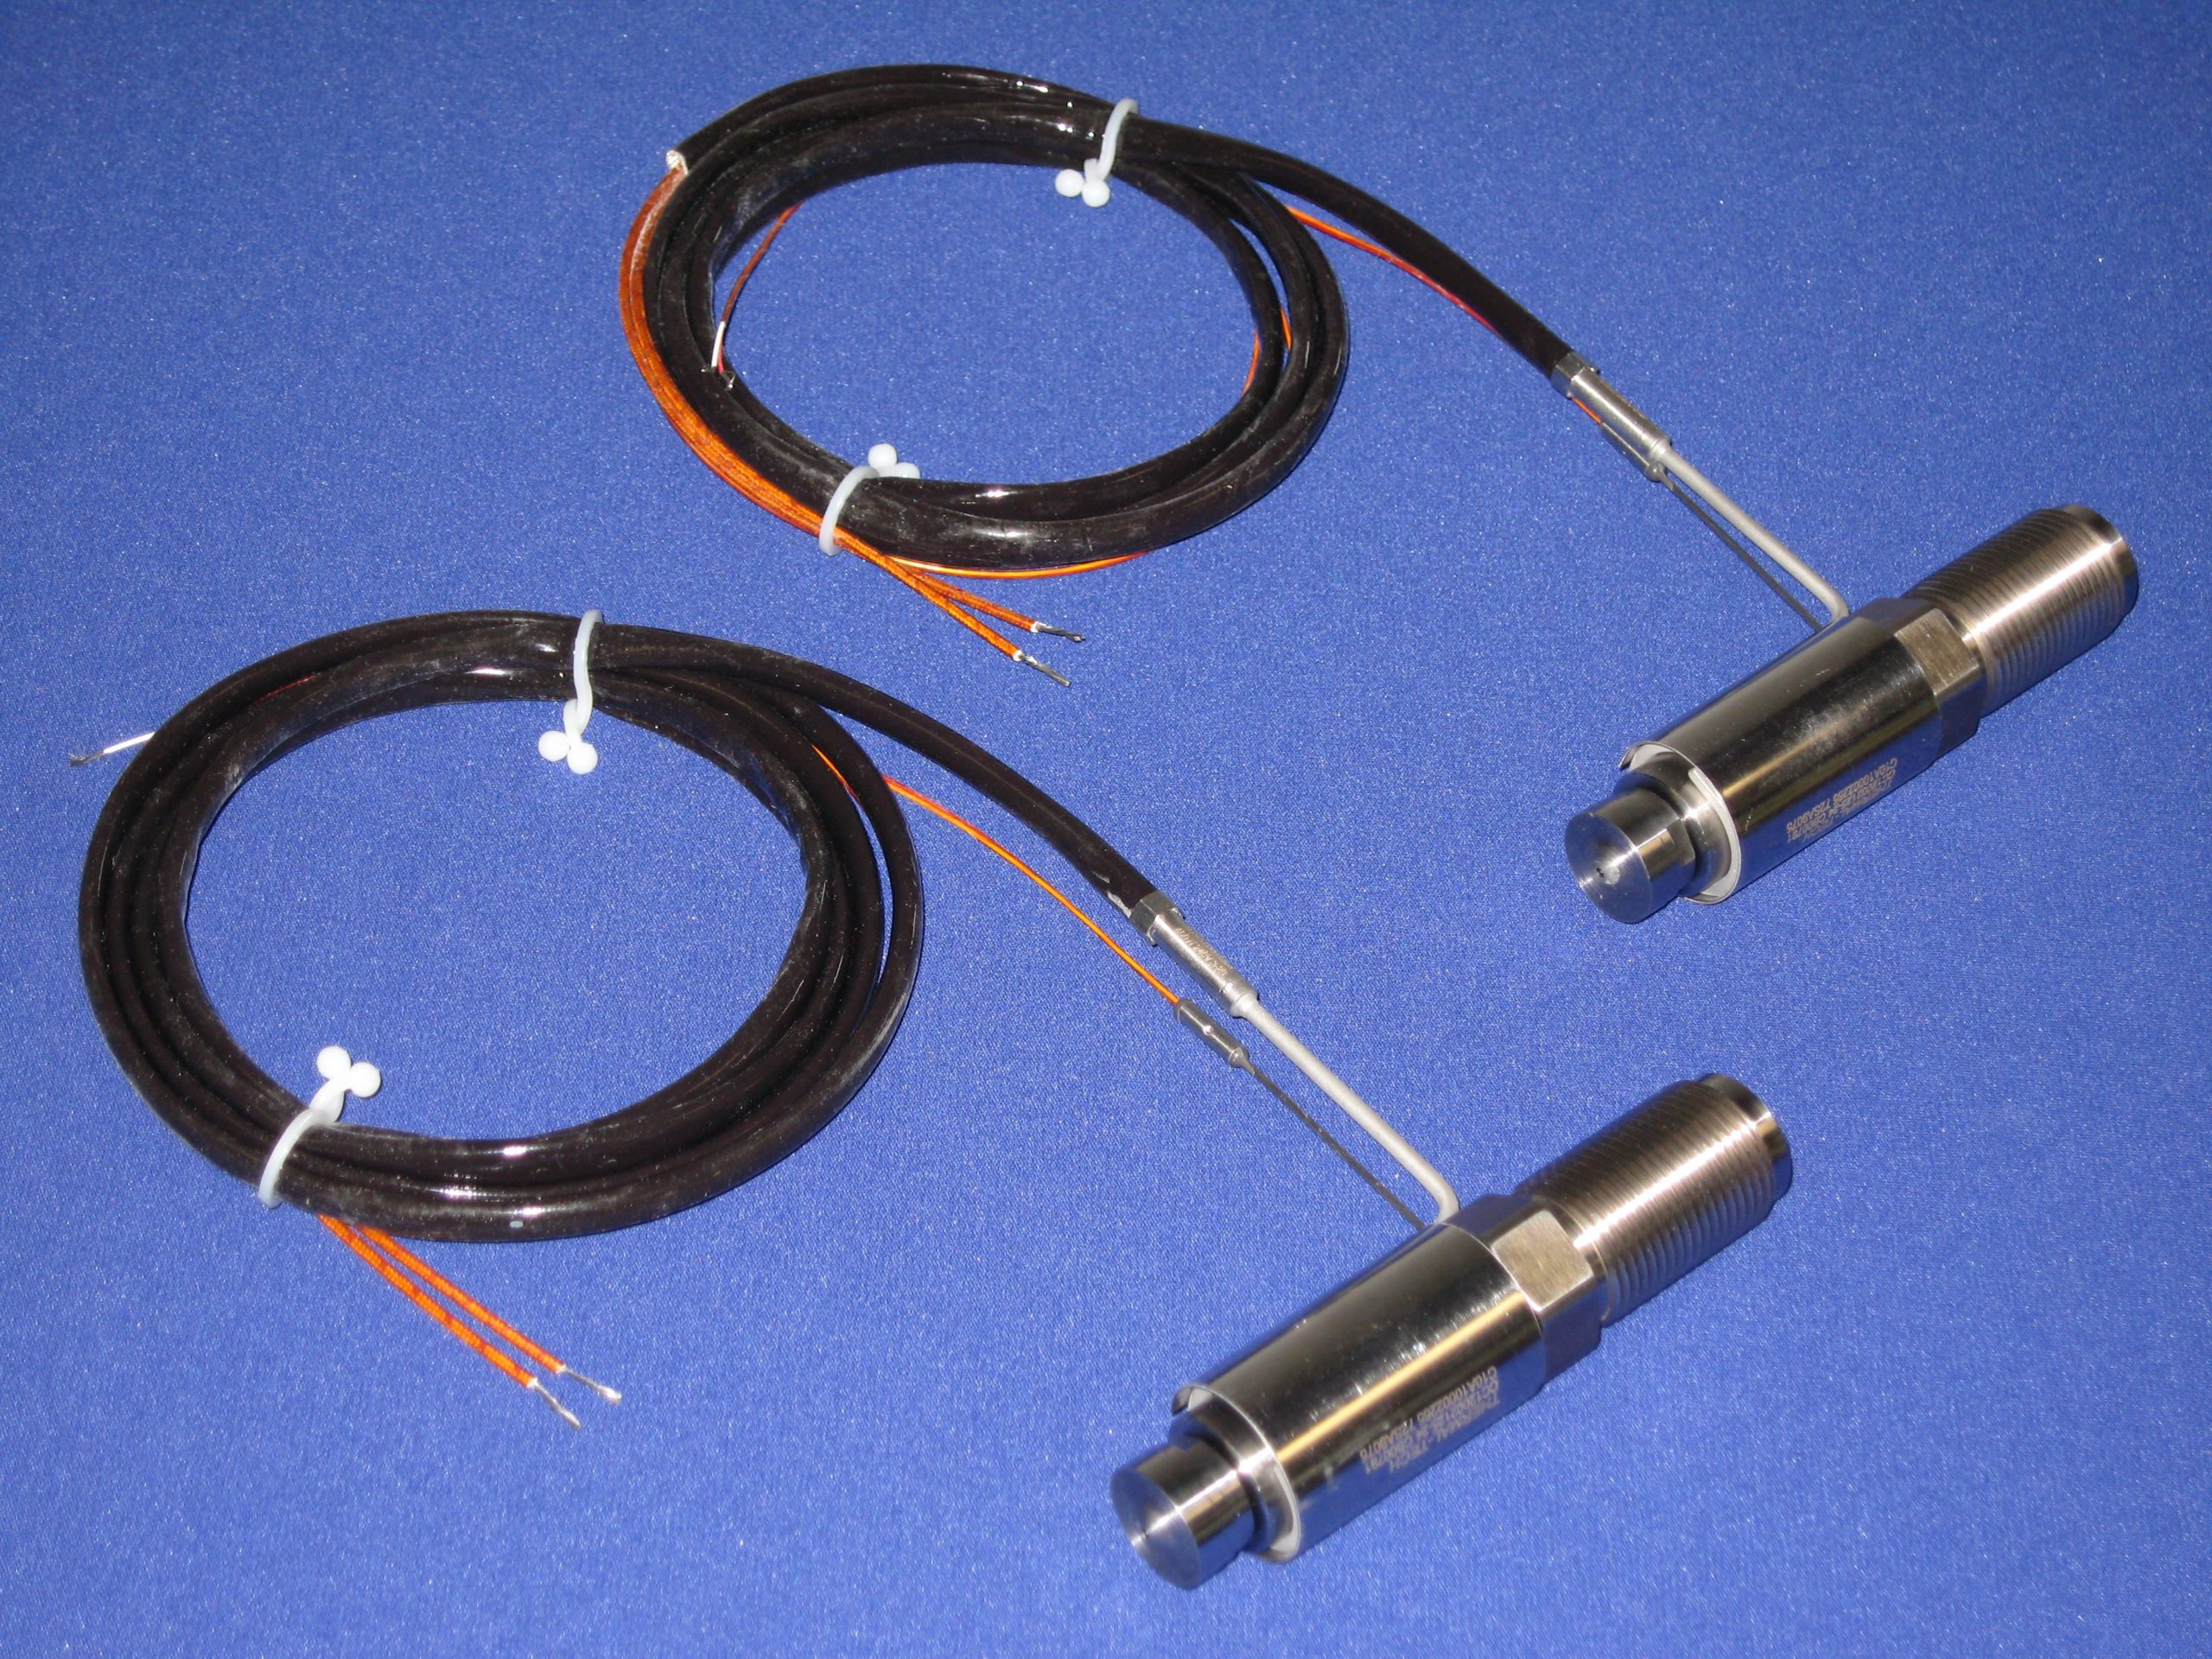 https://www.duratherm.com/wp-content/uploads/2021/04/Cable-Heated-Bushings-For-Obsolete-Incoe-System-scaled.jpg